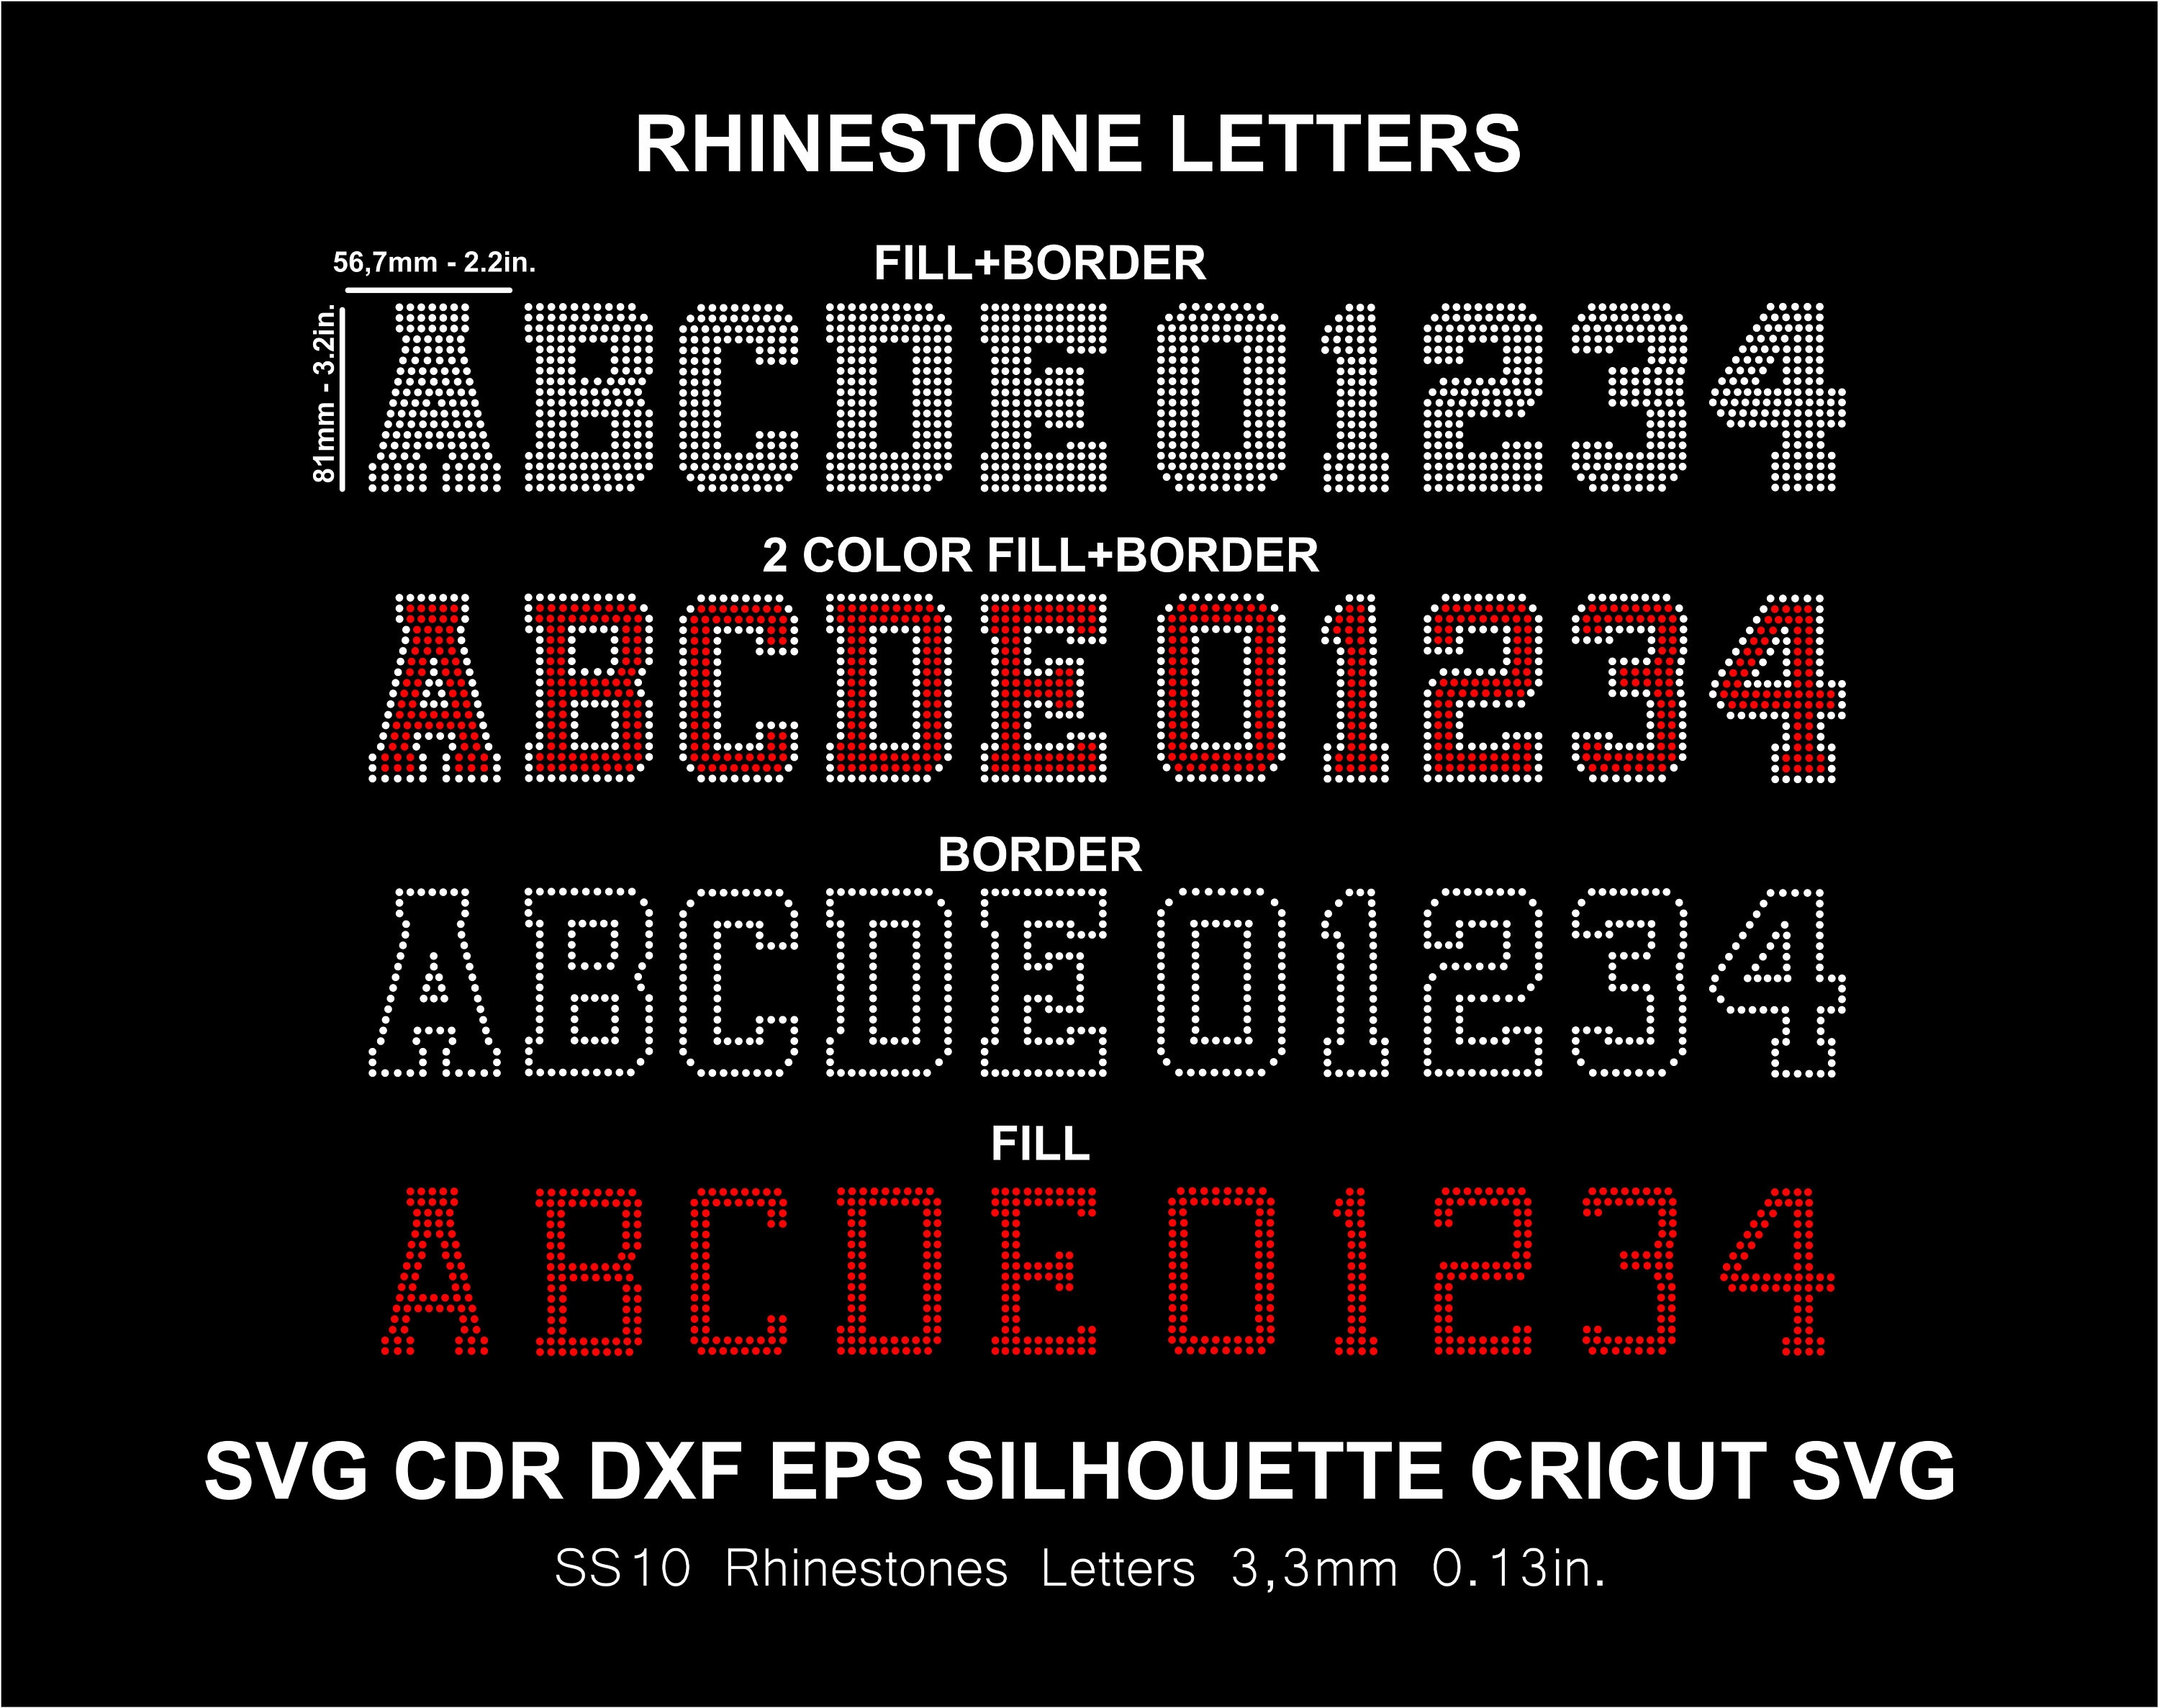 Rhinestone Letters Font Alphabet Single Line Arial Silhouette Cricut Svg  Dxf Cut Template Download Cutting Digital File SS10 Font